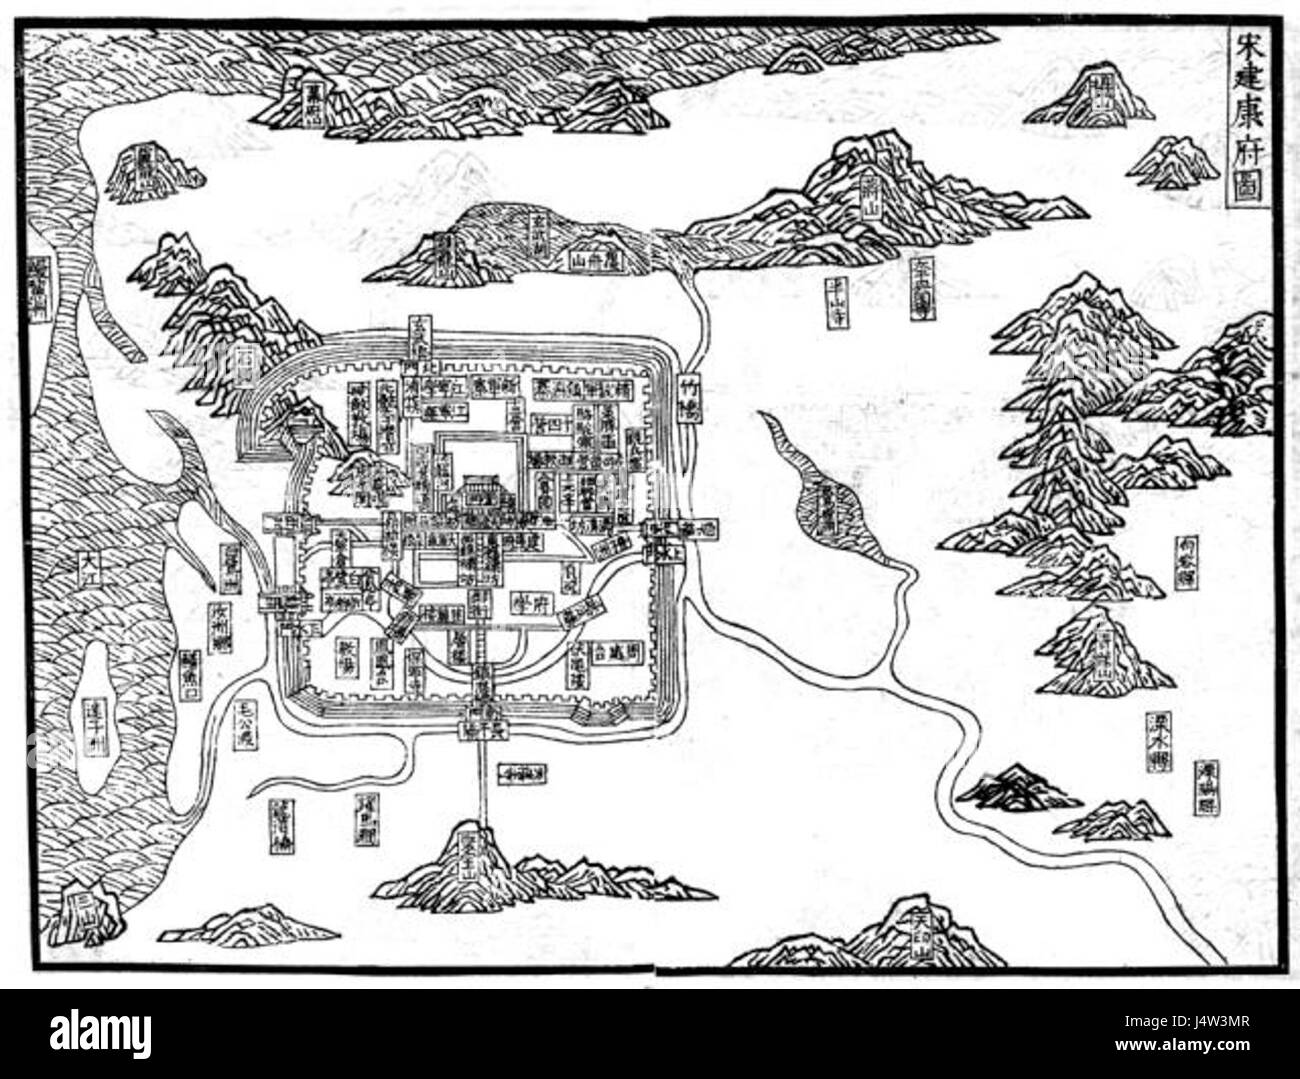 The Song Dynasty map of Nanjing Stock Photo